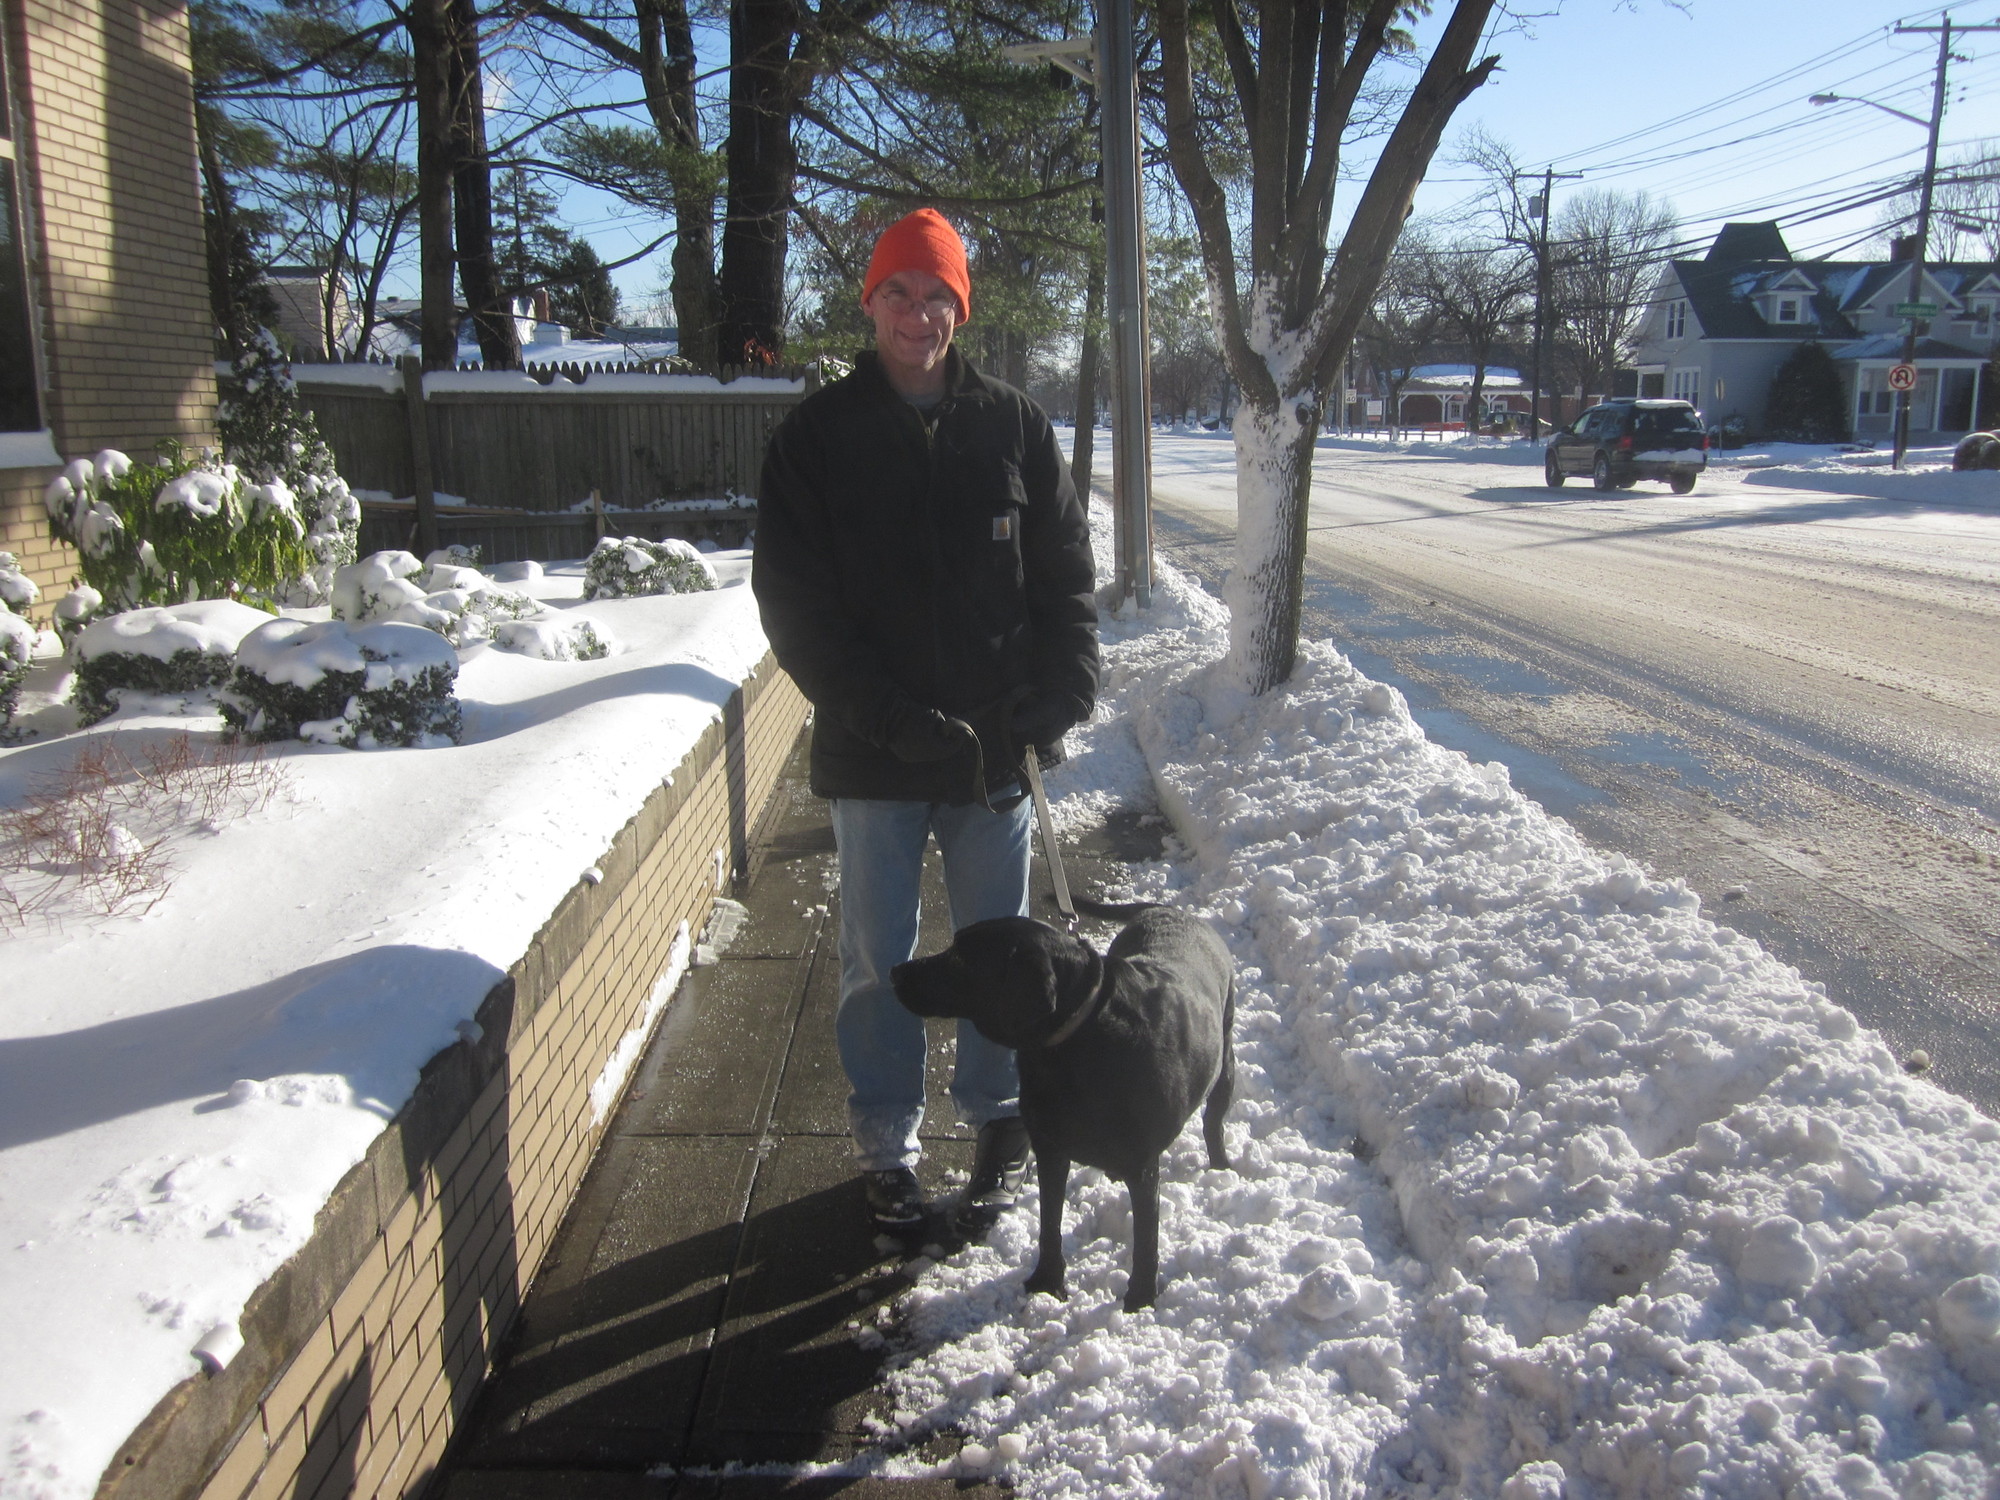 Surrey Drive resident Steven Smith walked his dog Lola in the snow.